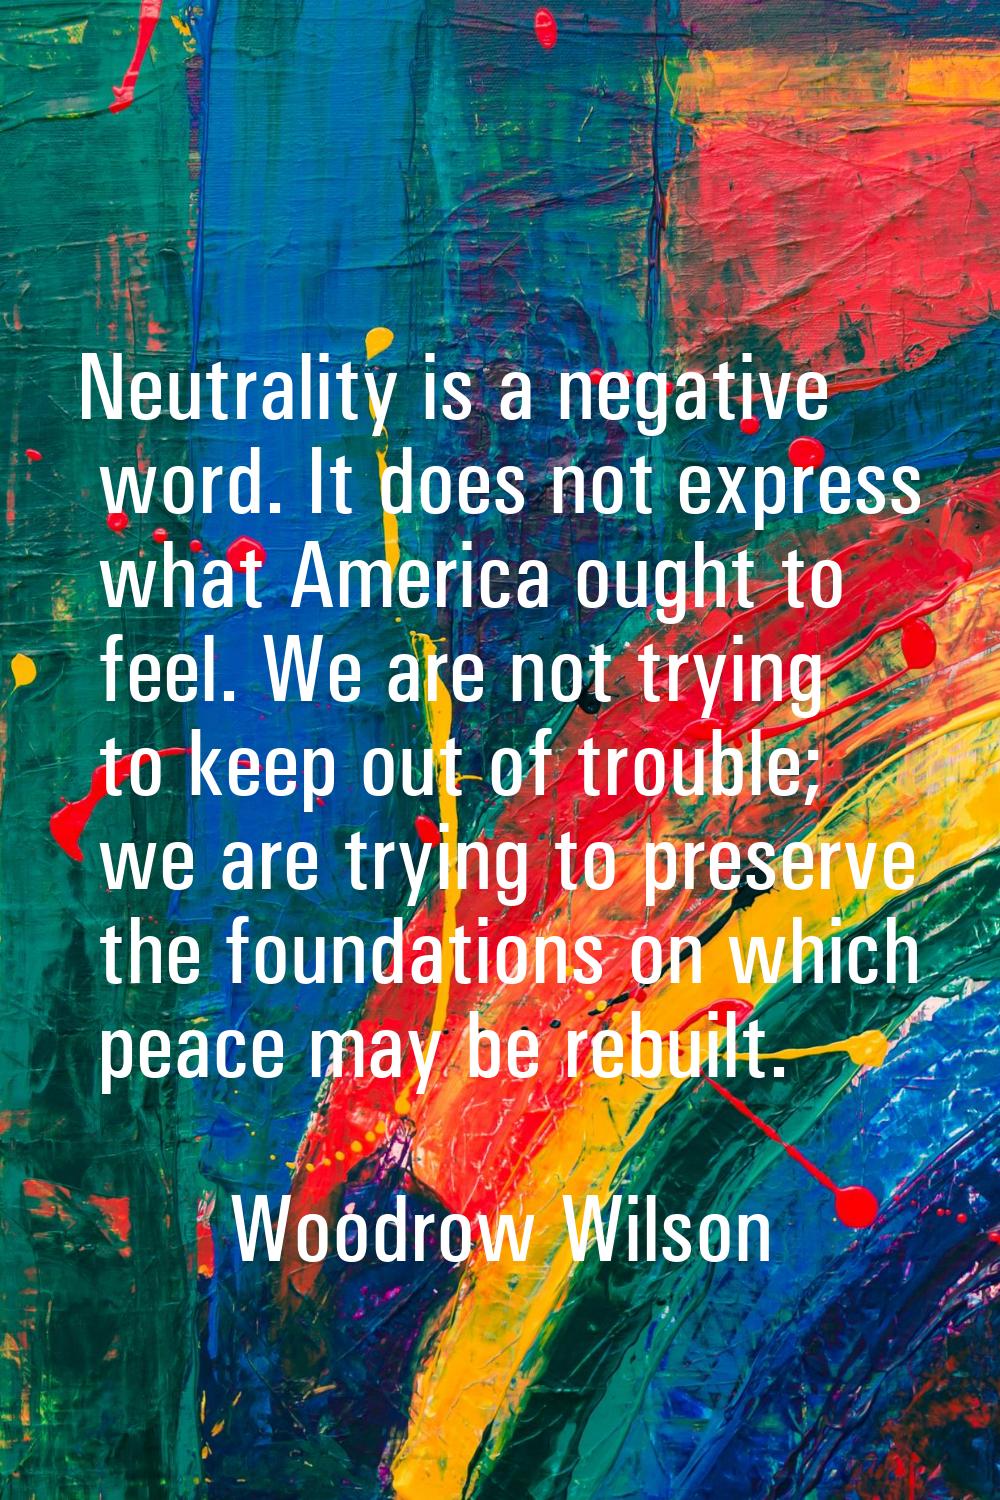 Neutrality is a negative word. It does not express what America ought to feel. We are not trying to